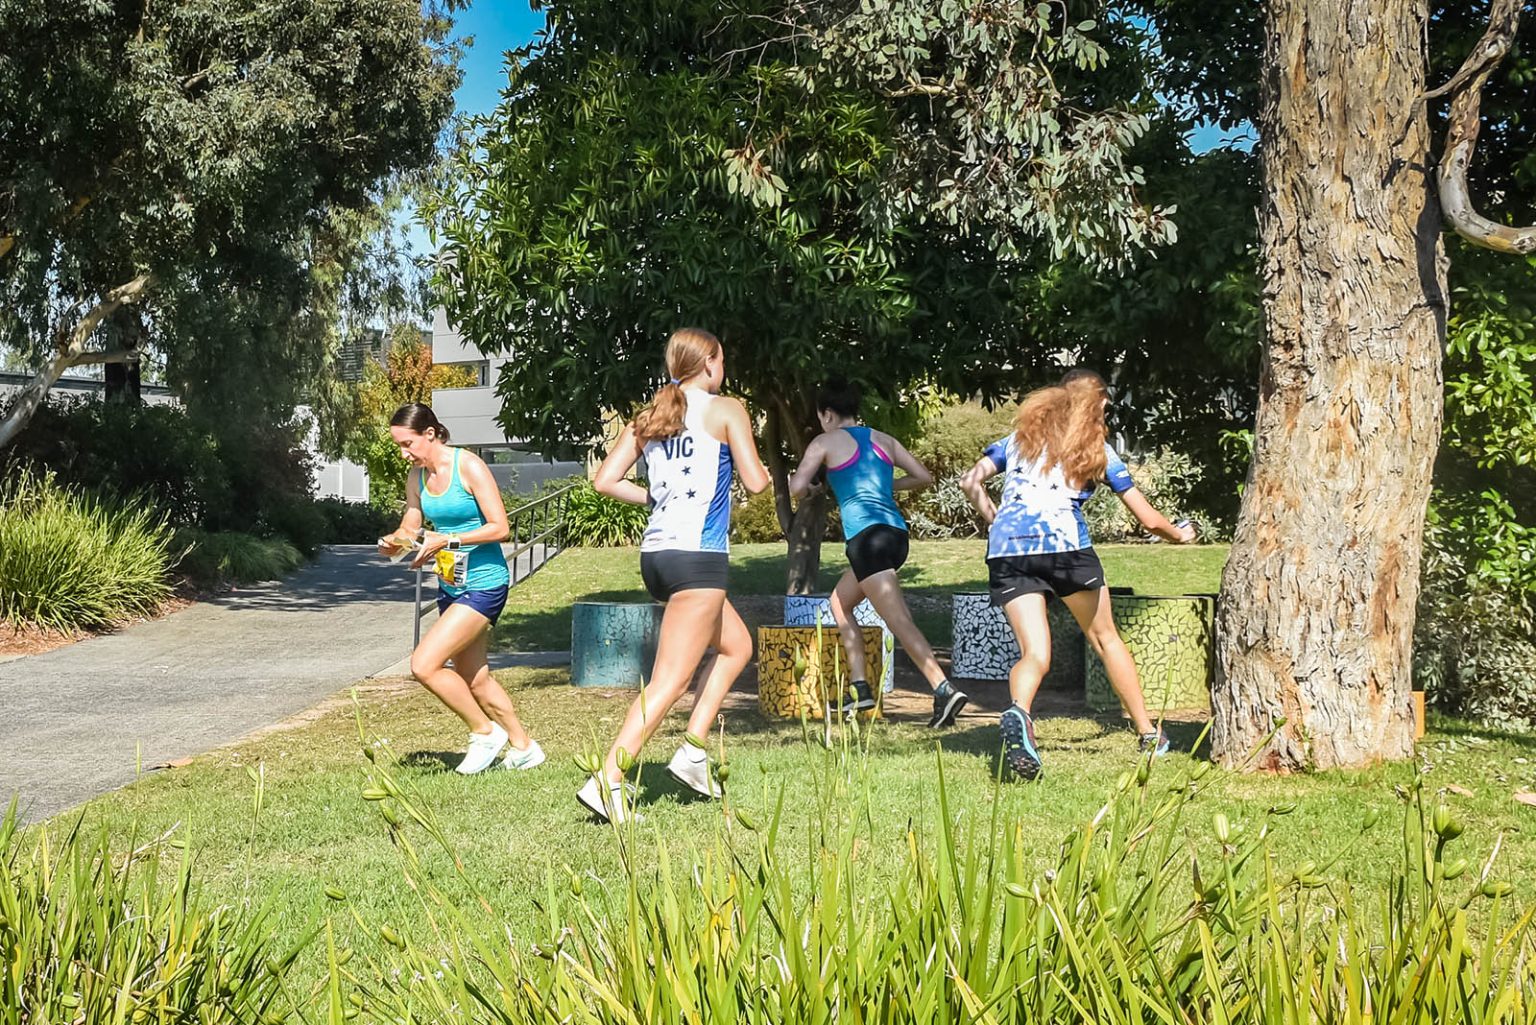 Women in close order competing in a sprint orienteering event. Photo by Mike Dowling